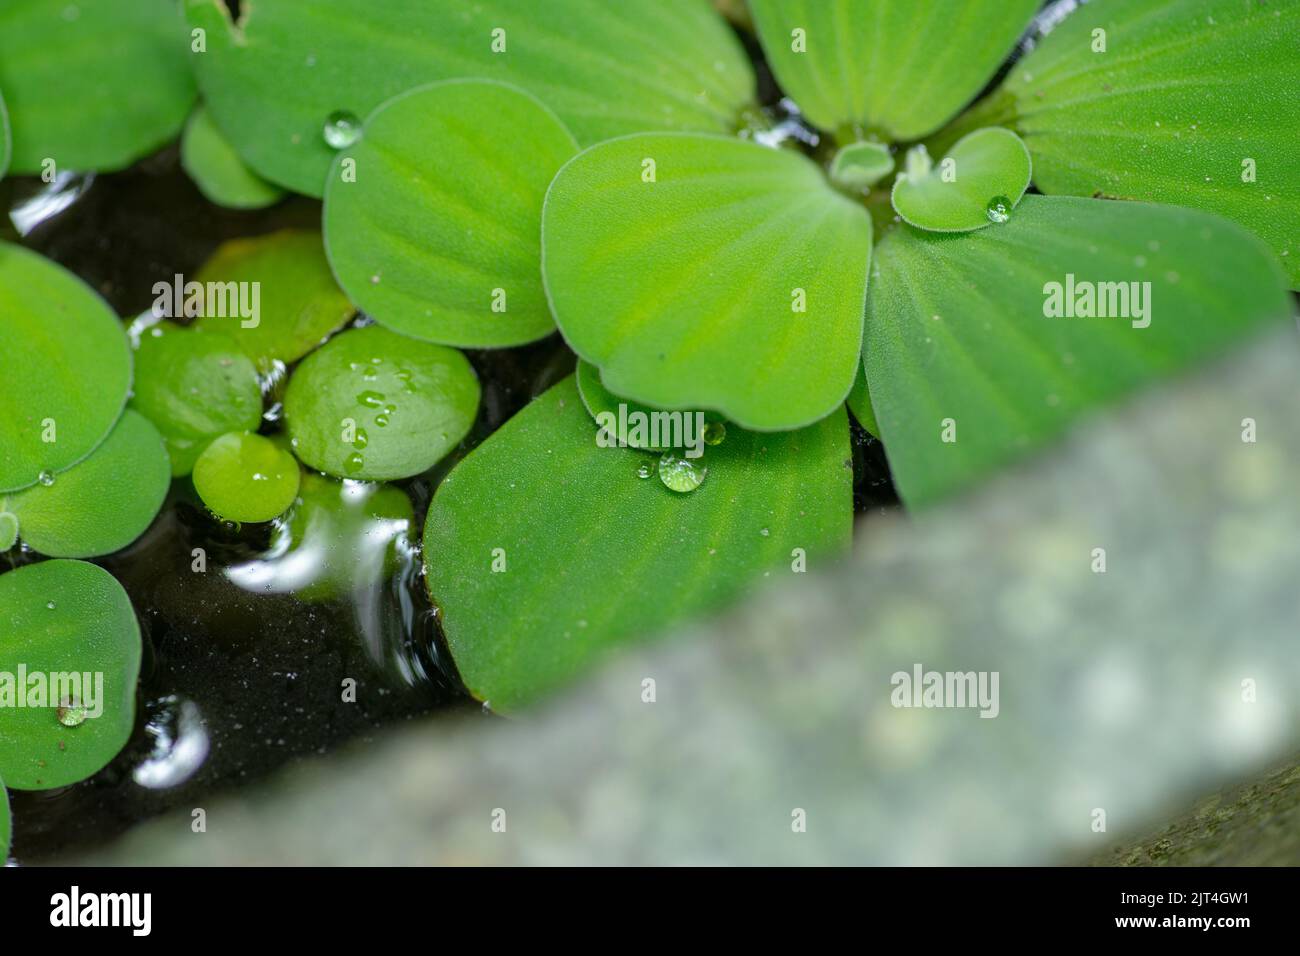 vegetables or leaves are planted on high to cool the house, the green leaves make others nostalgic for home. Stock Photo